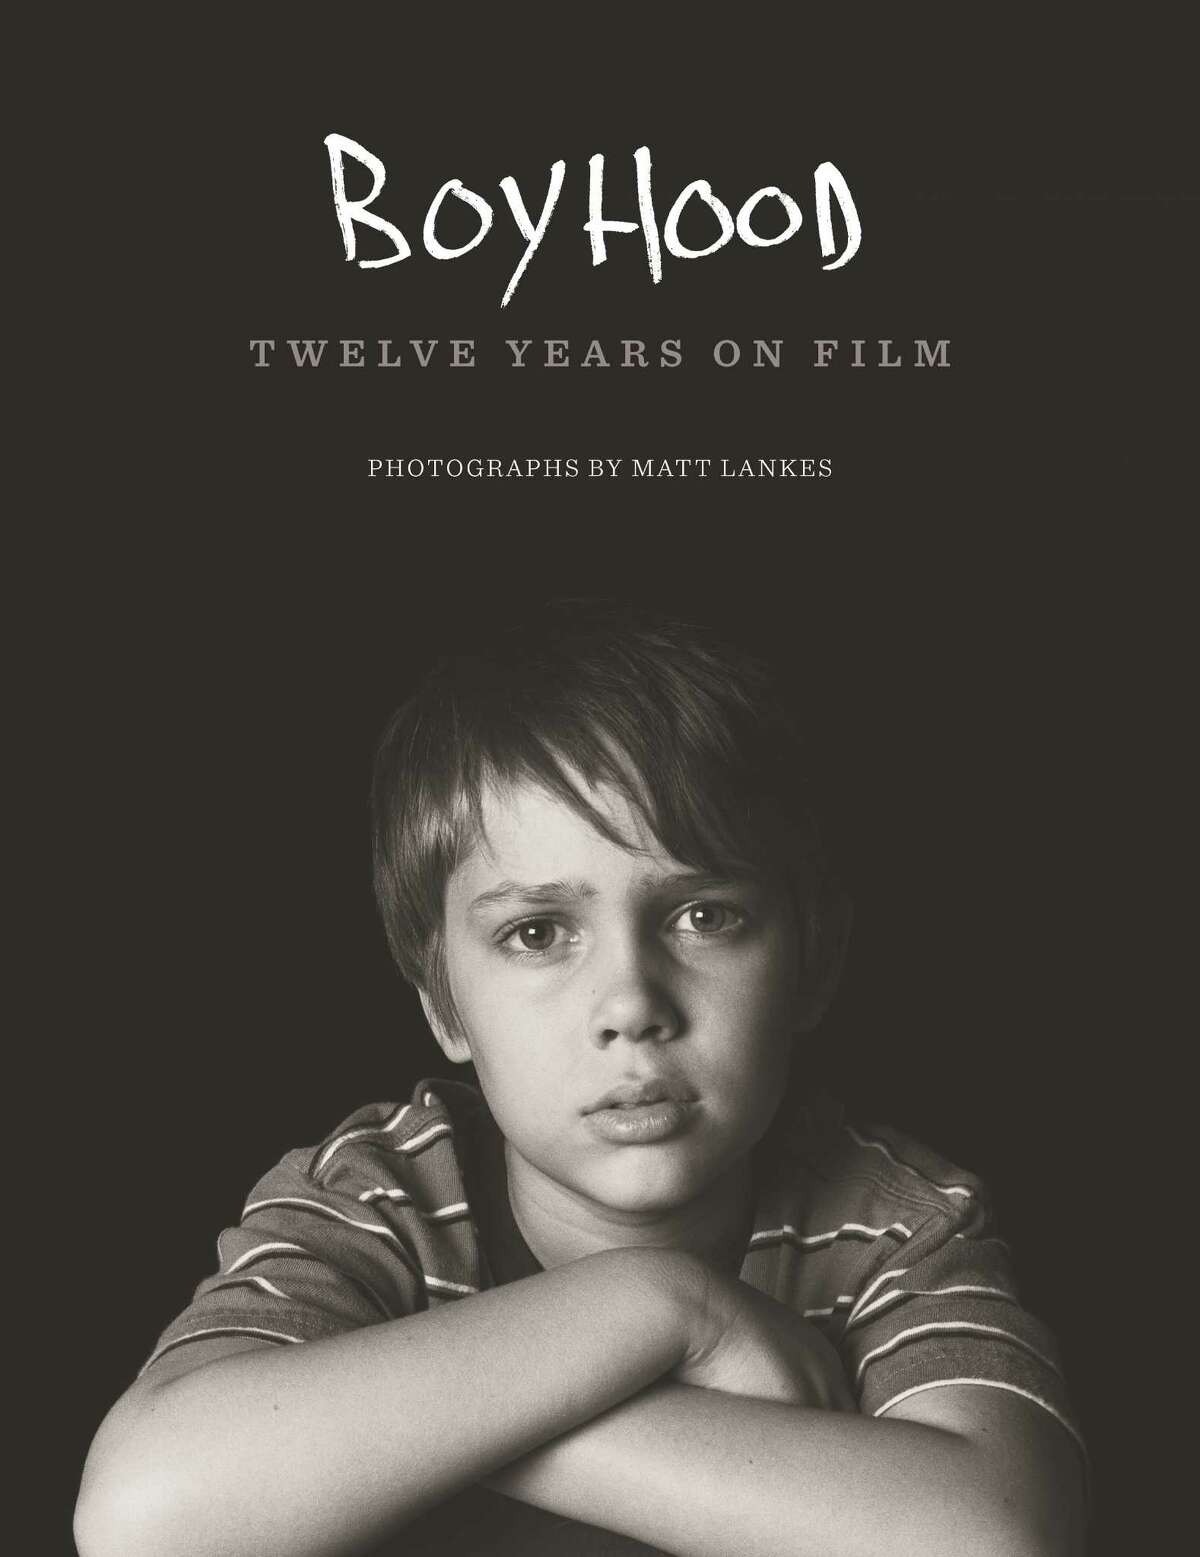 A new book from the University of Texas Press presents more than 200 images taken over 12 years on the set of director Richard Linklater’s critically acclaimed film, "Boyhood." "Boyhood: Twelve Years on Film" features photos by Austin-based photographer Matt Lankes, along with commentary by Linklater, actors Ethan Hawke, Patricia Arquette, Ellar Coltrane and others to create a behind-the-scenes portrait of the film.